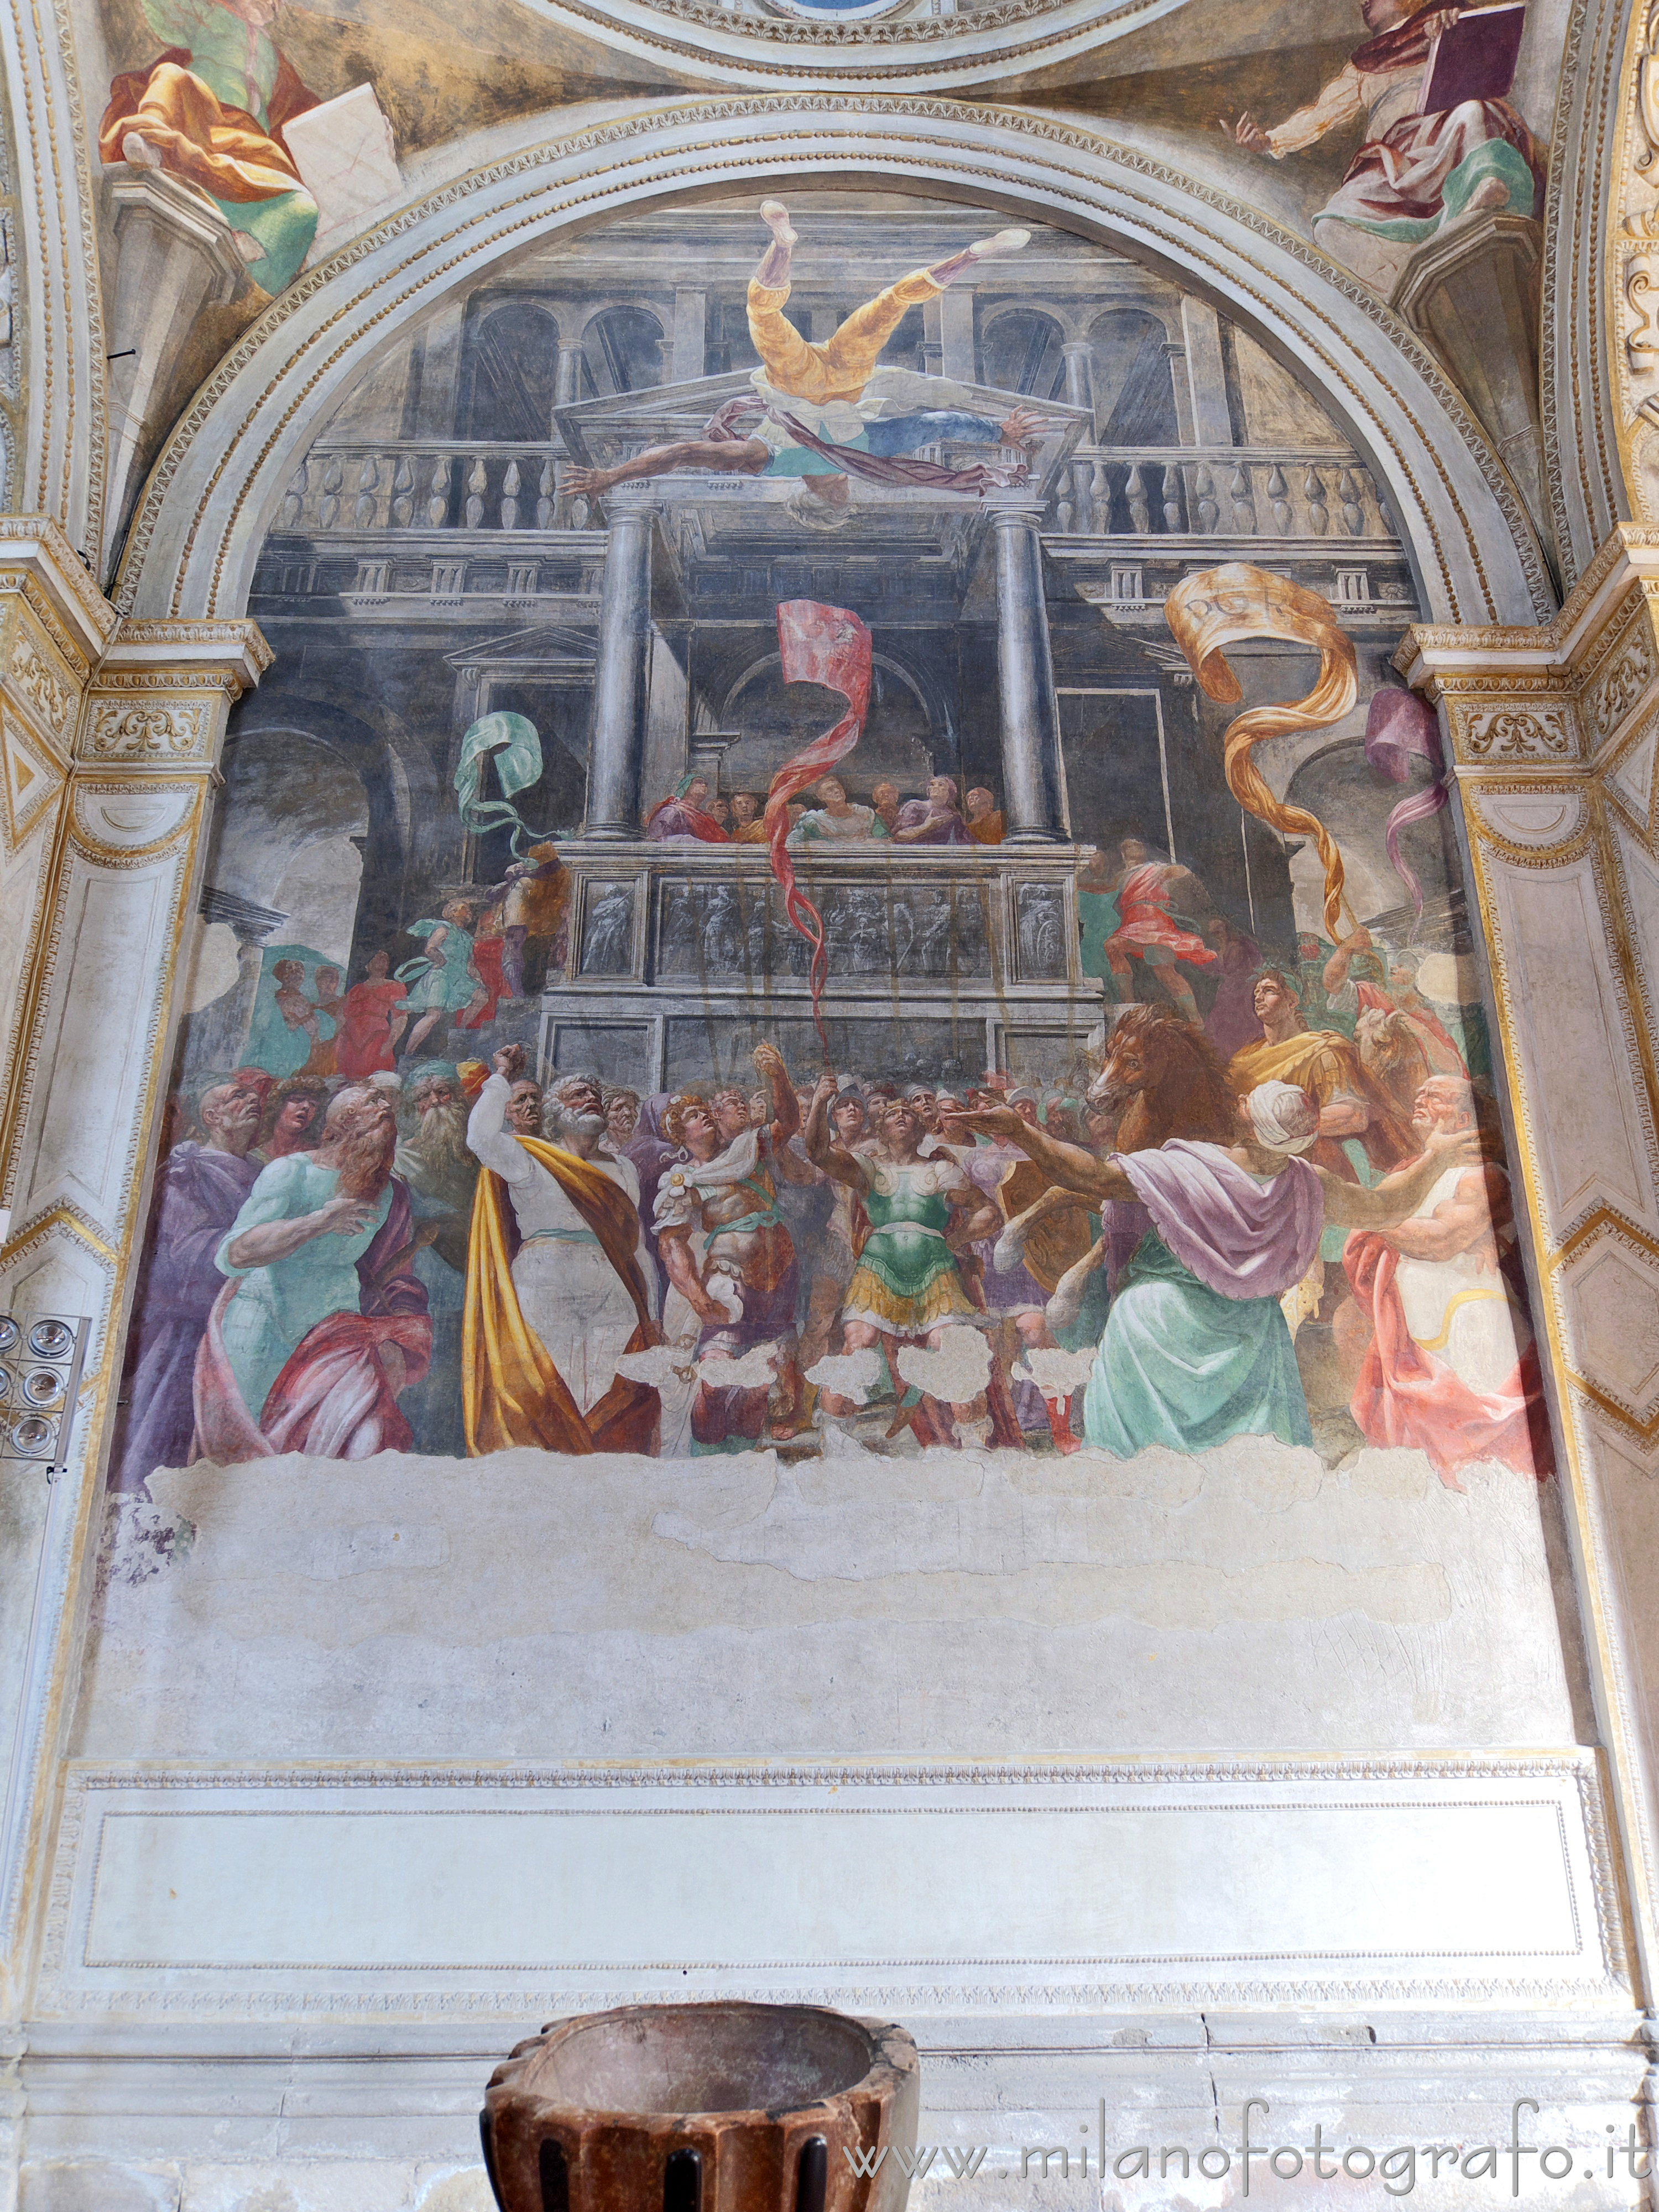 Milan (Italy): Fresco of St. Peter and the fall of Simon Magus in the Foppa Chapel of the Basilica of San Marco - Milan (Italy)